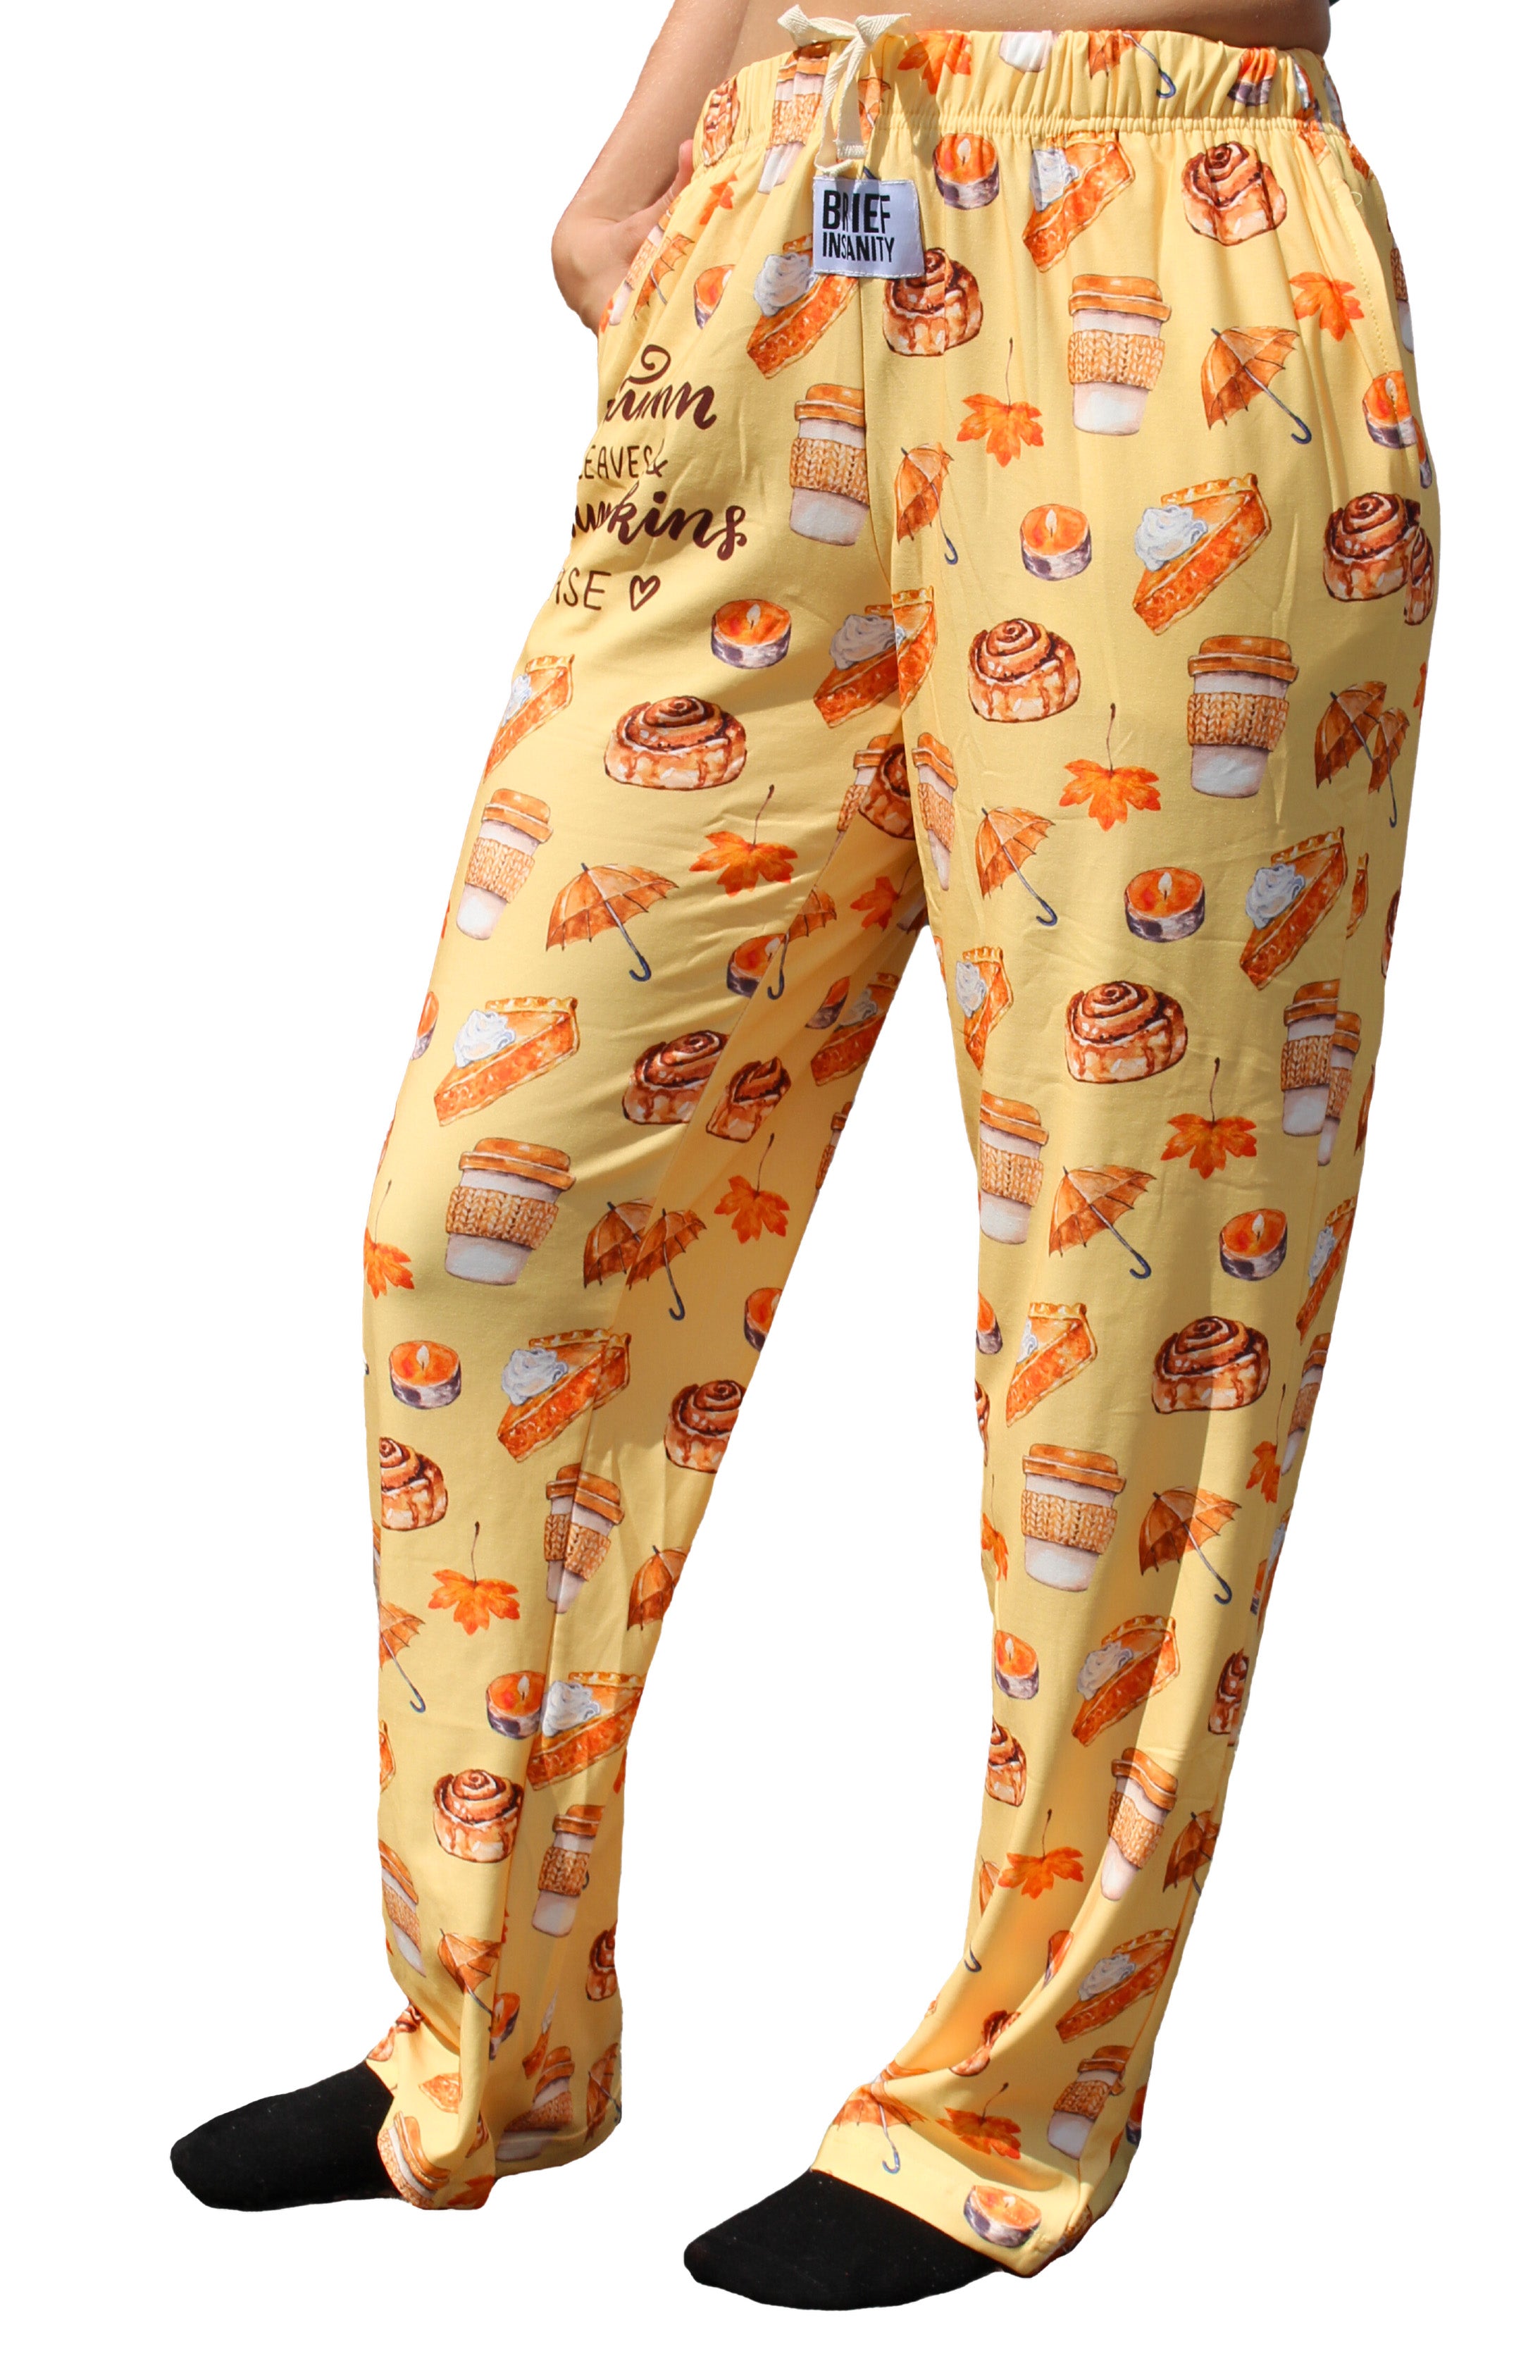 Autumn Leaves and Pumpkins Please Pajama Lounge Pants left side view on model (waist down)